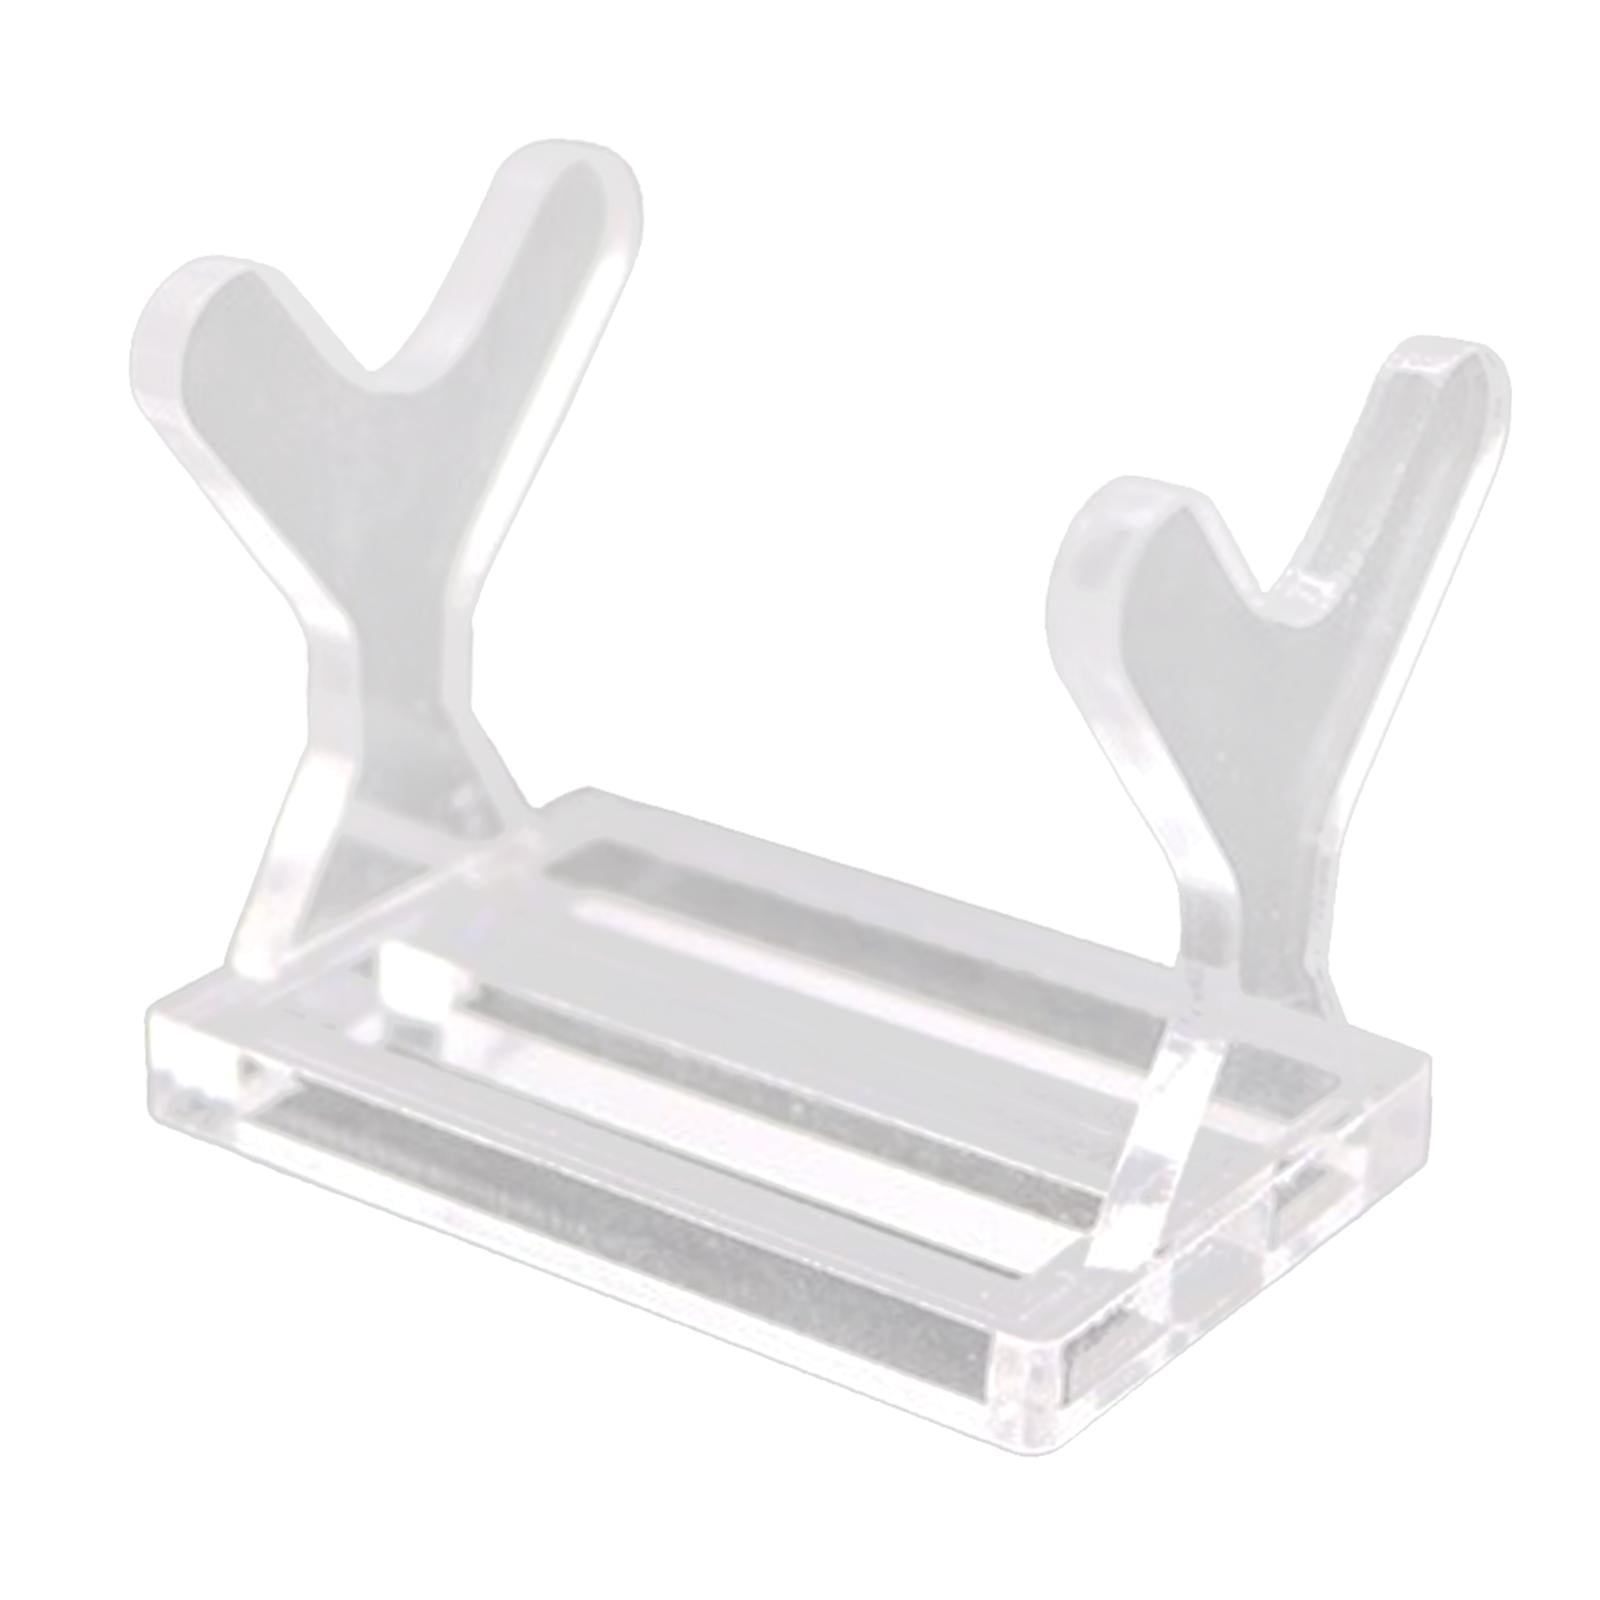 50 Fishing Lure Display Stand Easels 